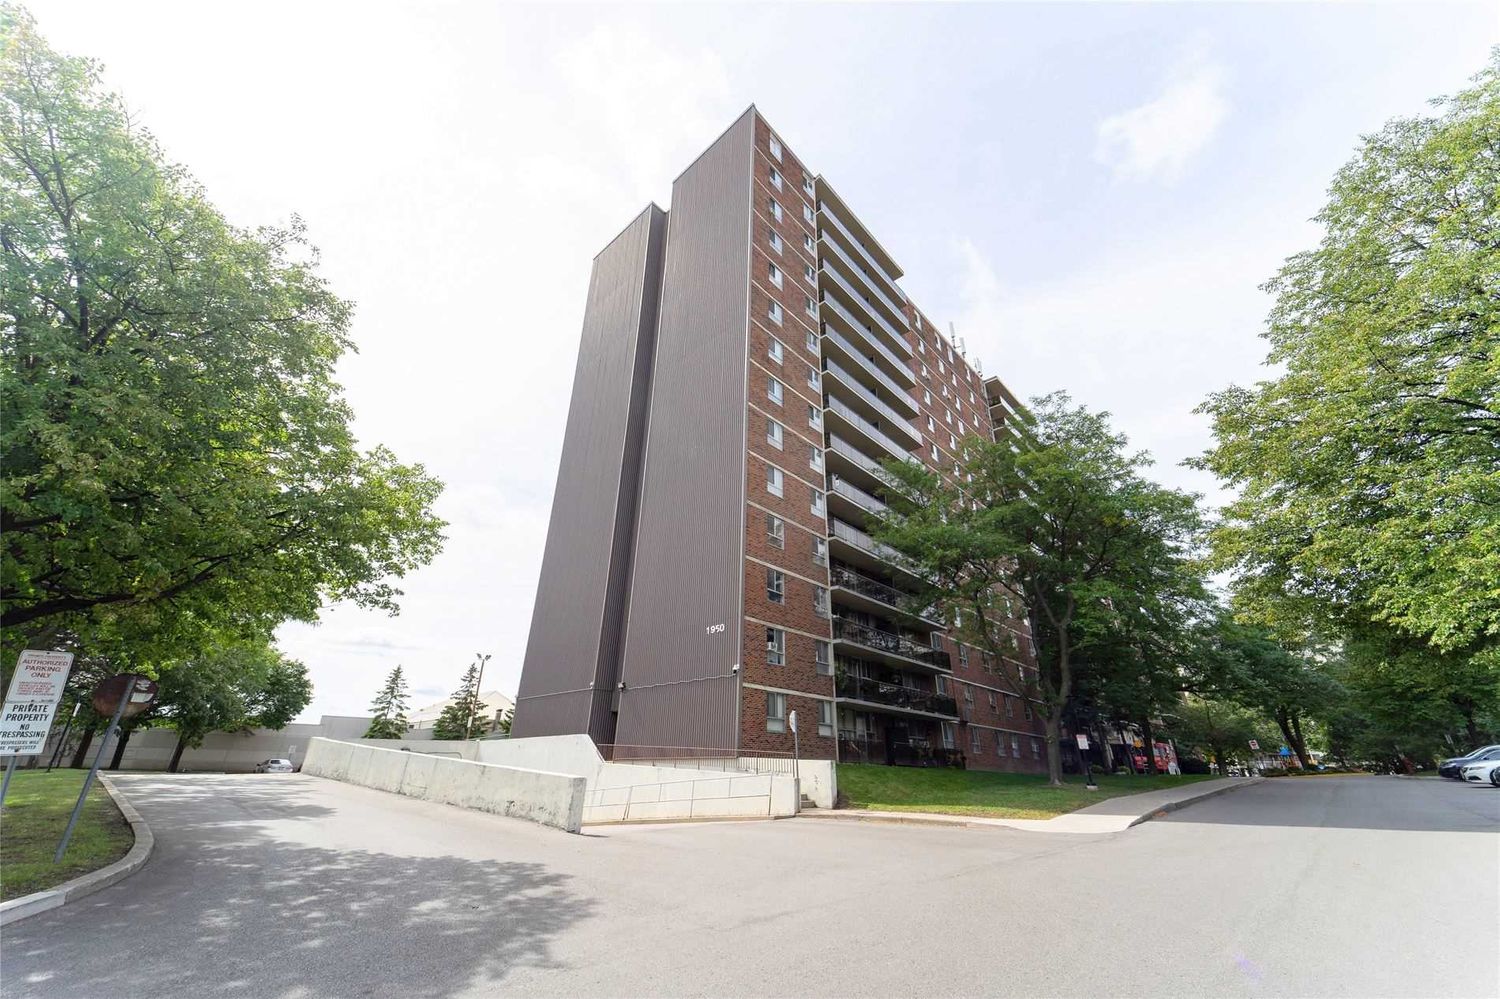 1950 Kennedy Road. Dorset Towers Condos is located in  Scarborough, Toronto - image #2 of 3